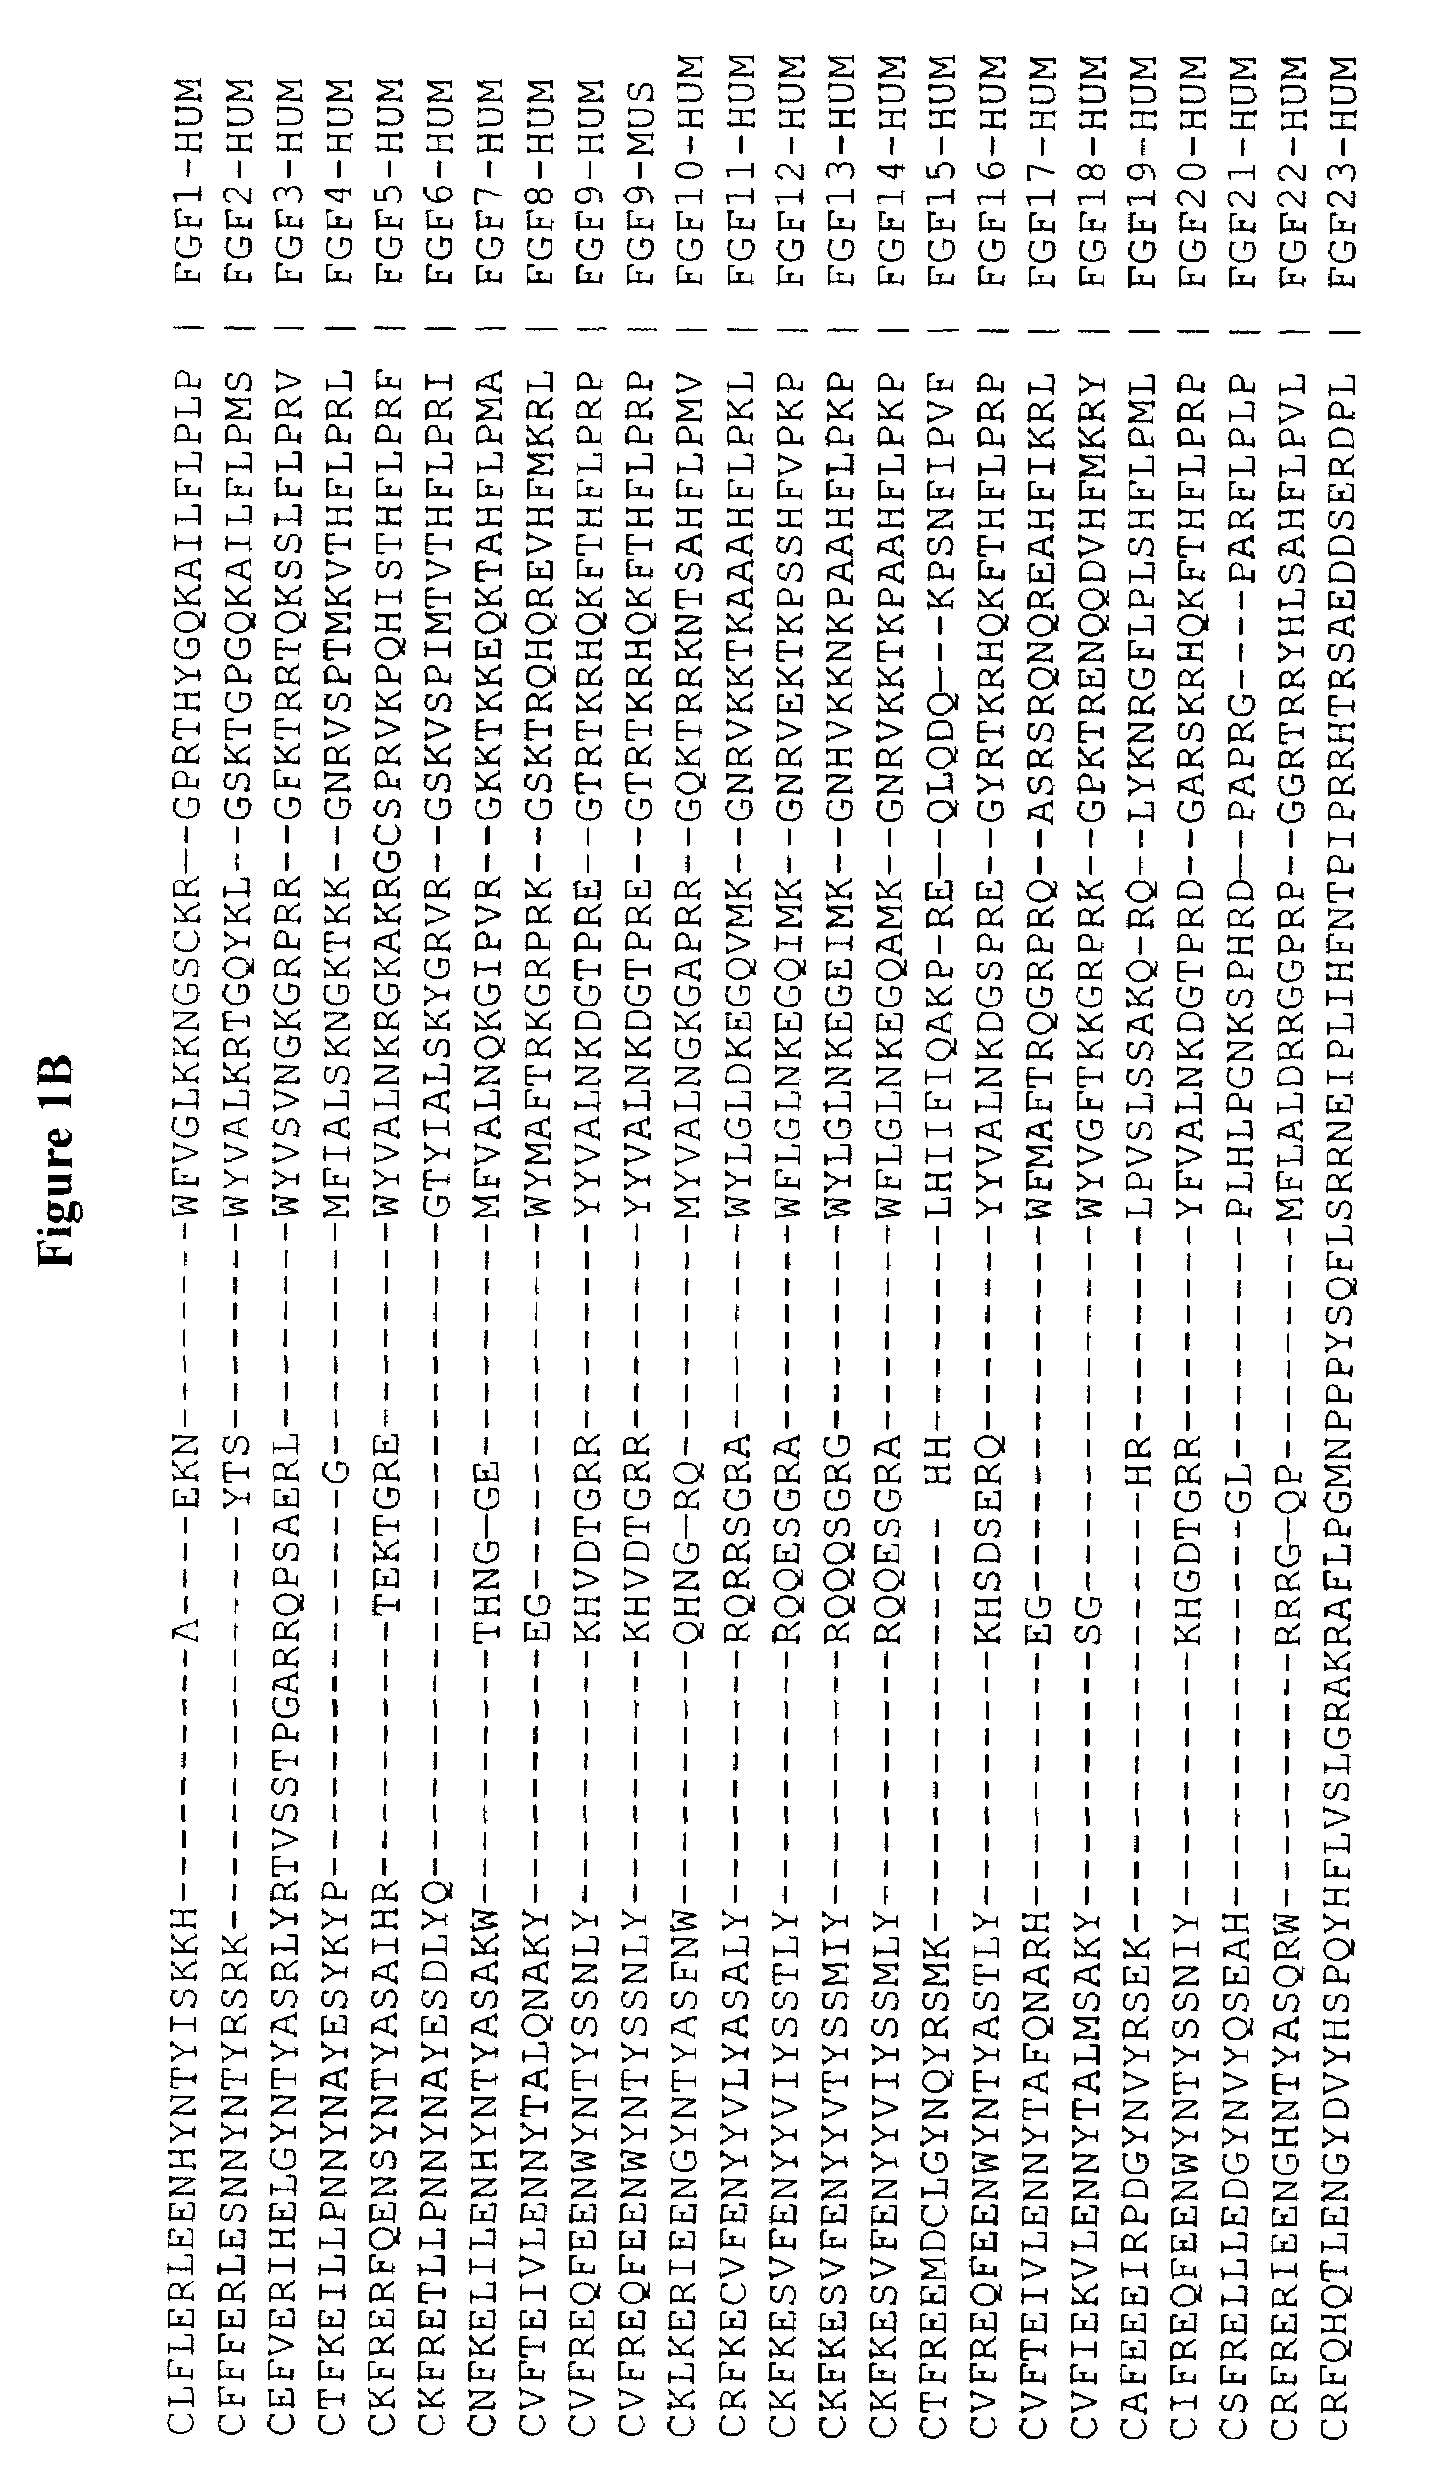 Active variants of FGF with improved specificity